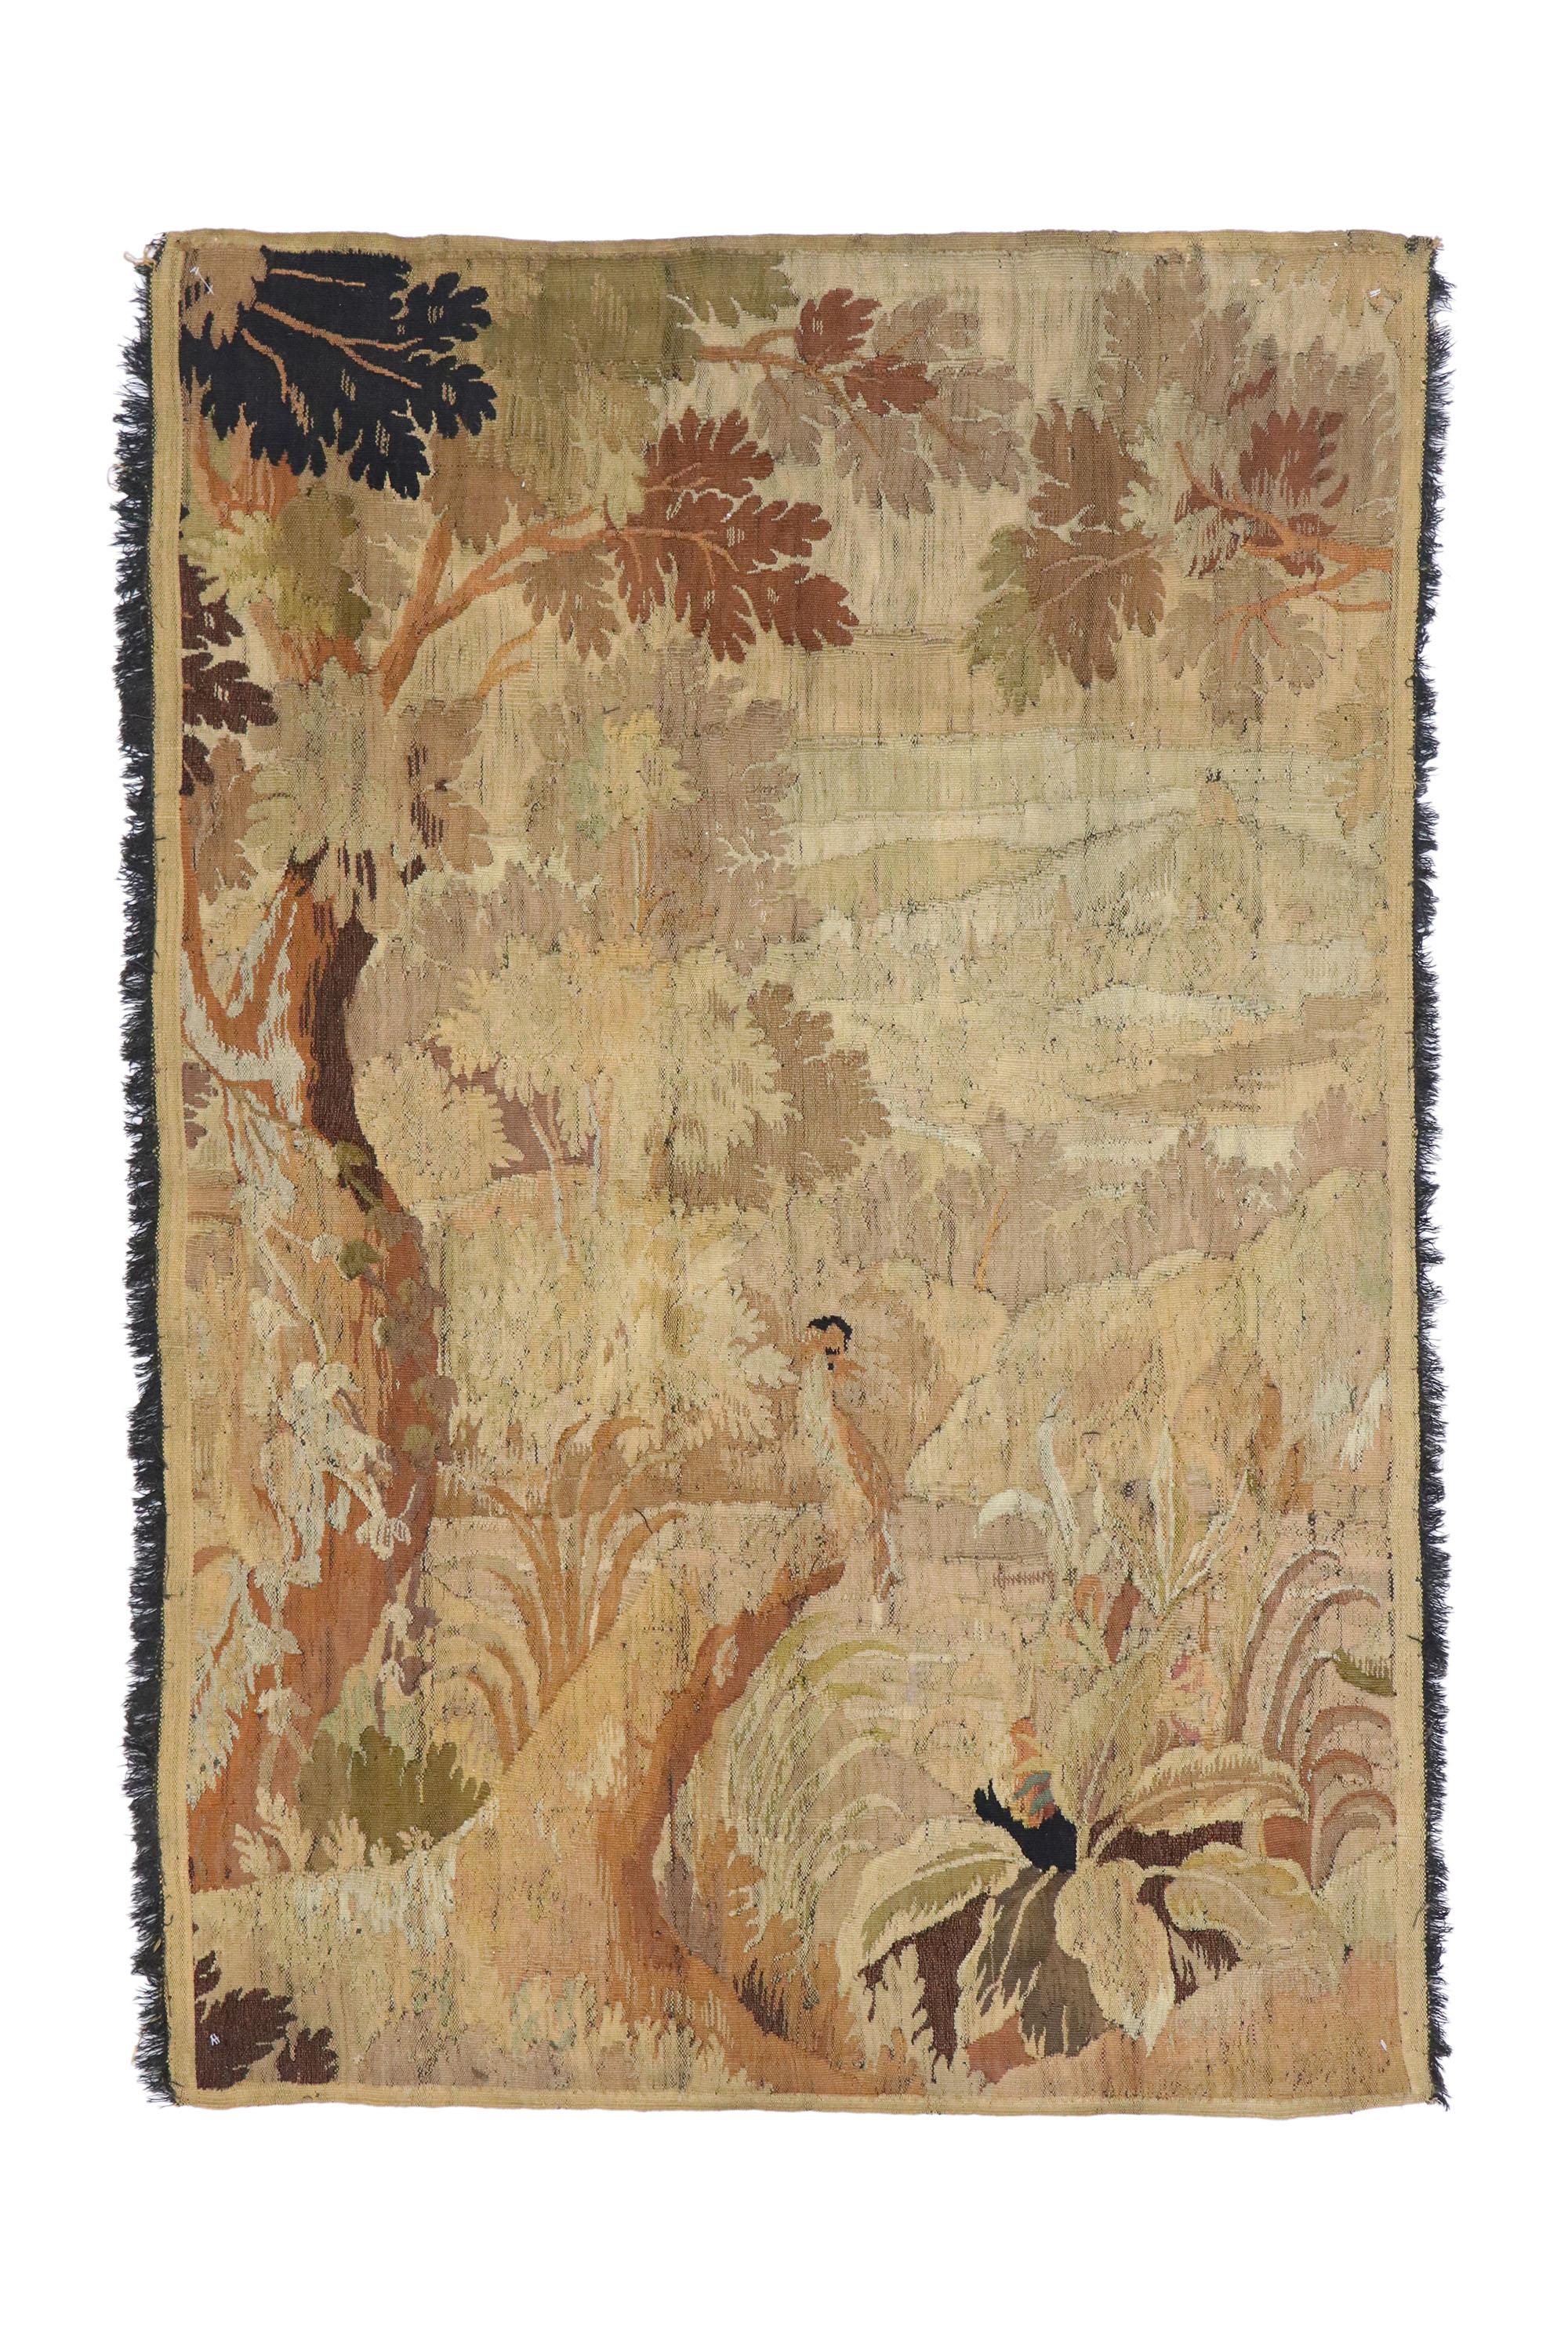 76959 antique French tapestry wall hanging with landscape scene and old world charm. This handwoven wool antique French Aubusson verdure tapestry is well-loved featuring a landscape scene with old world charm and French Provincial appeal. Among the